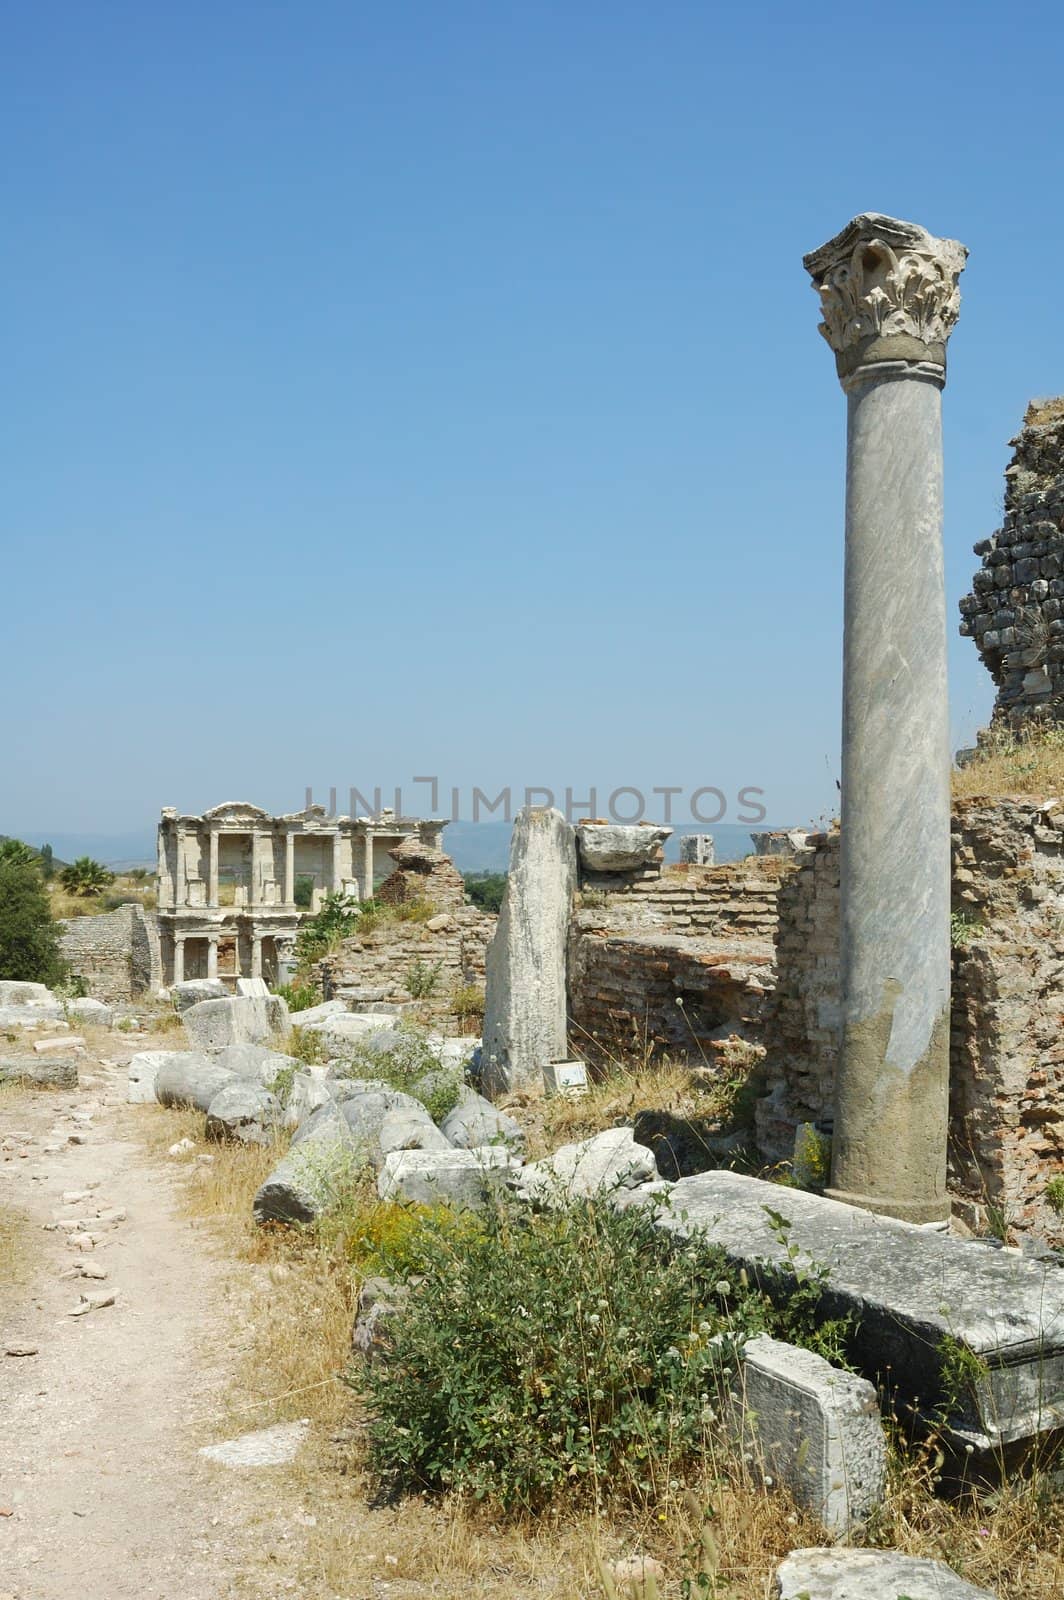 Roman street in Ephesus, Turkey with columns and the library of Celsus at the end